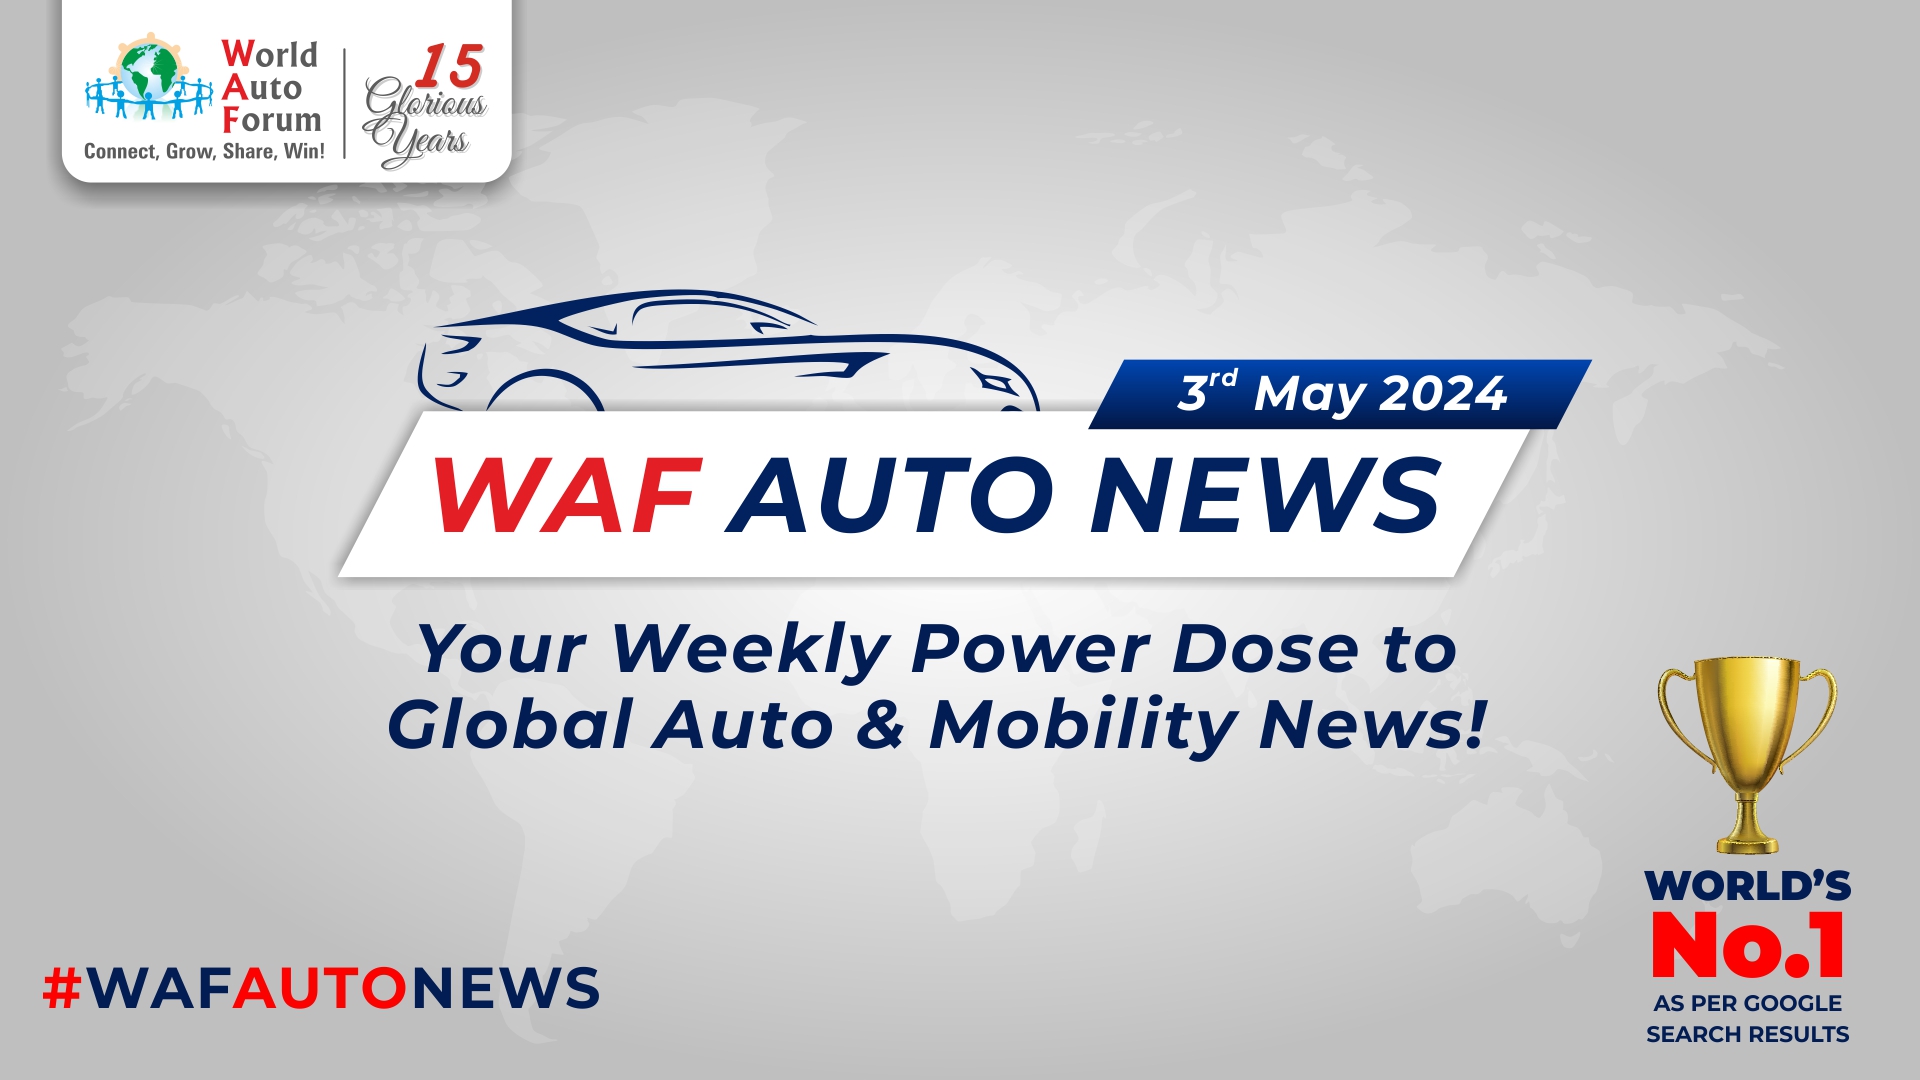 WAF Auto News | The Auto World This Week (3rd May 2024) | World Auto Forum